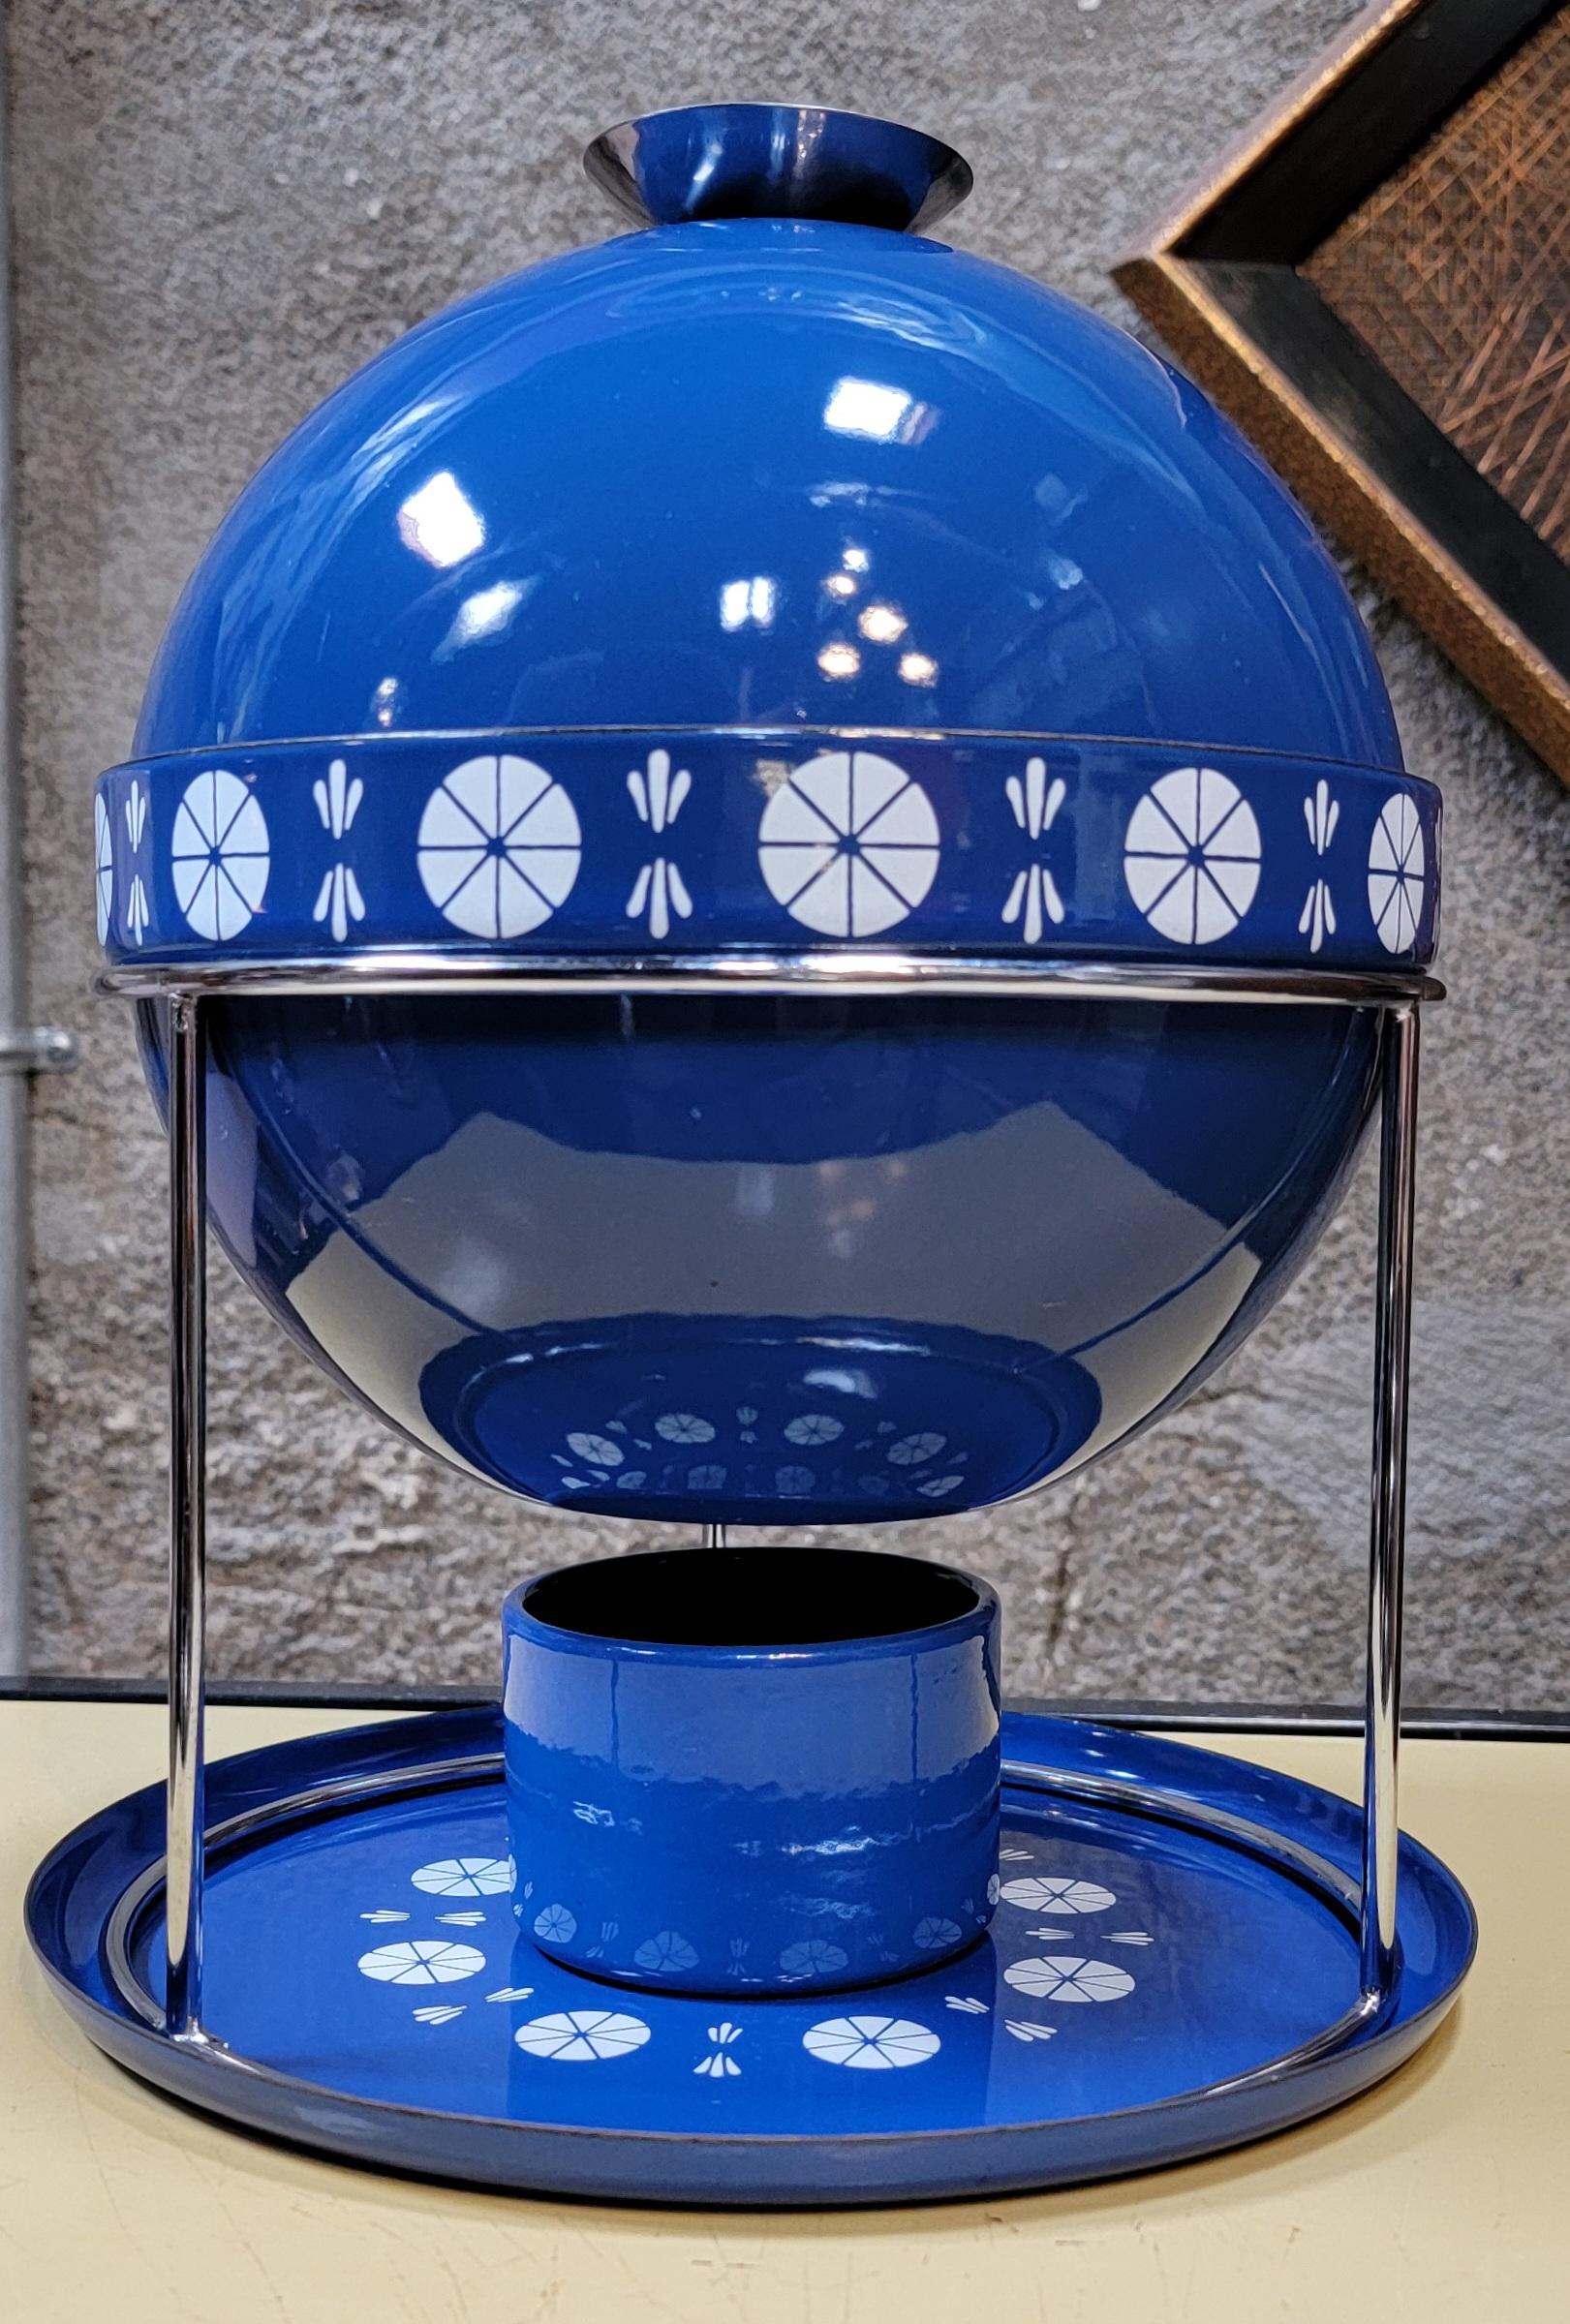 Striking blue and white enameled steel fondue pot by Catherineholm of Norway. Circa. 1960's. Exceptional condition. Complete set including under-plate and sterno cup.